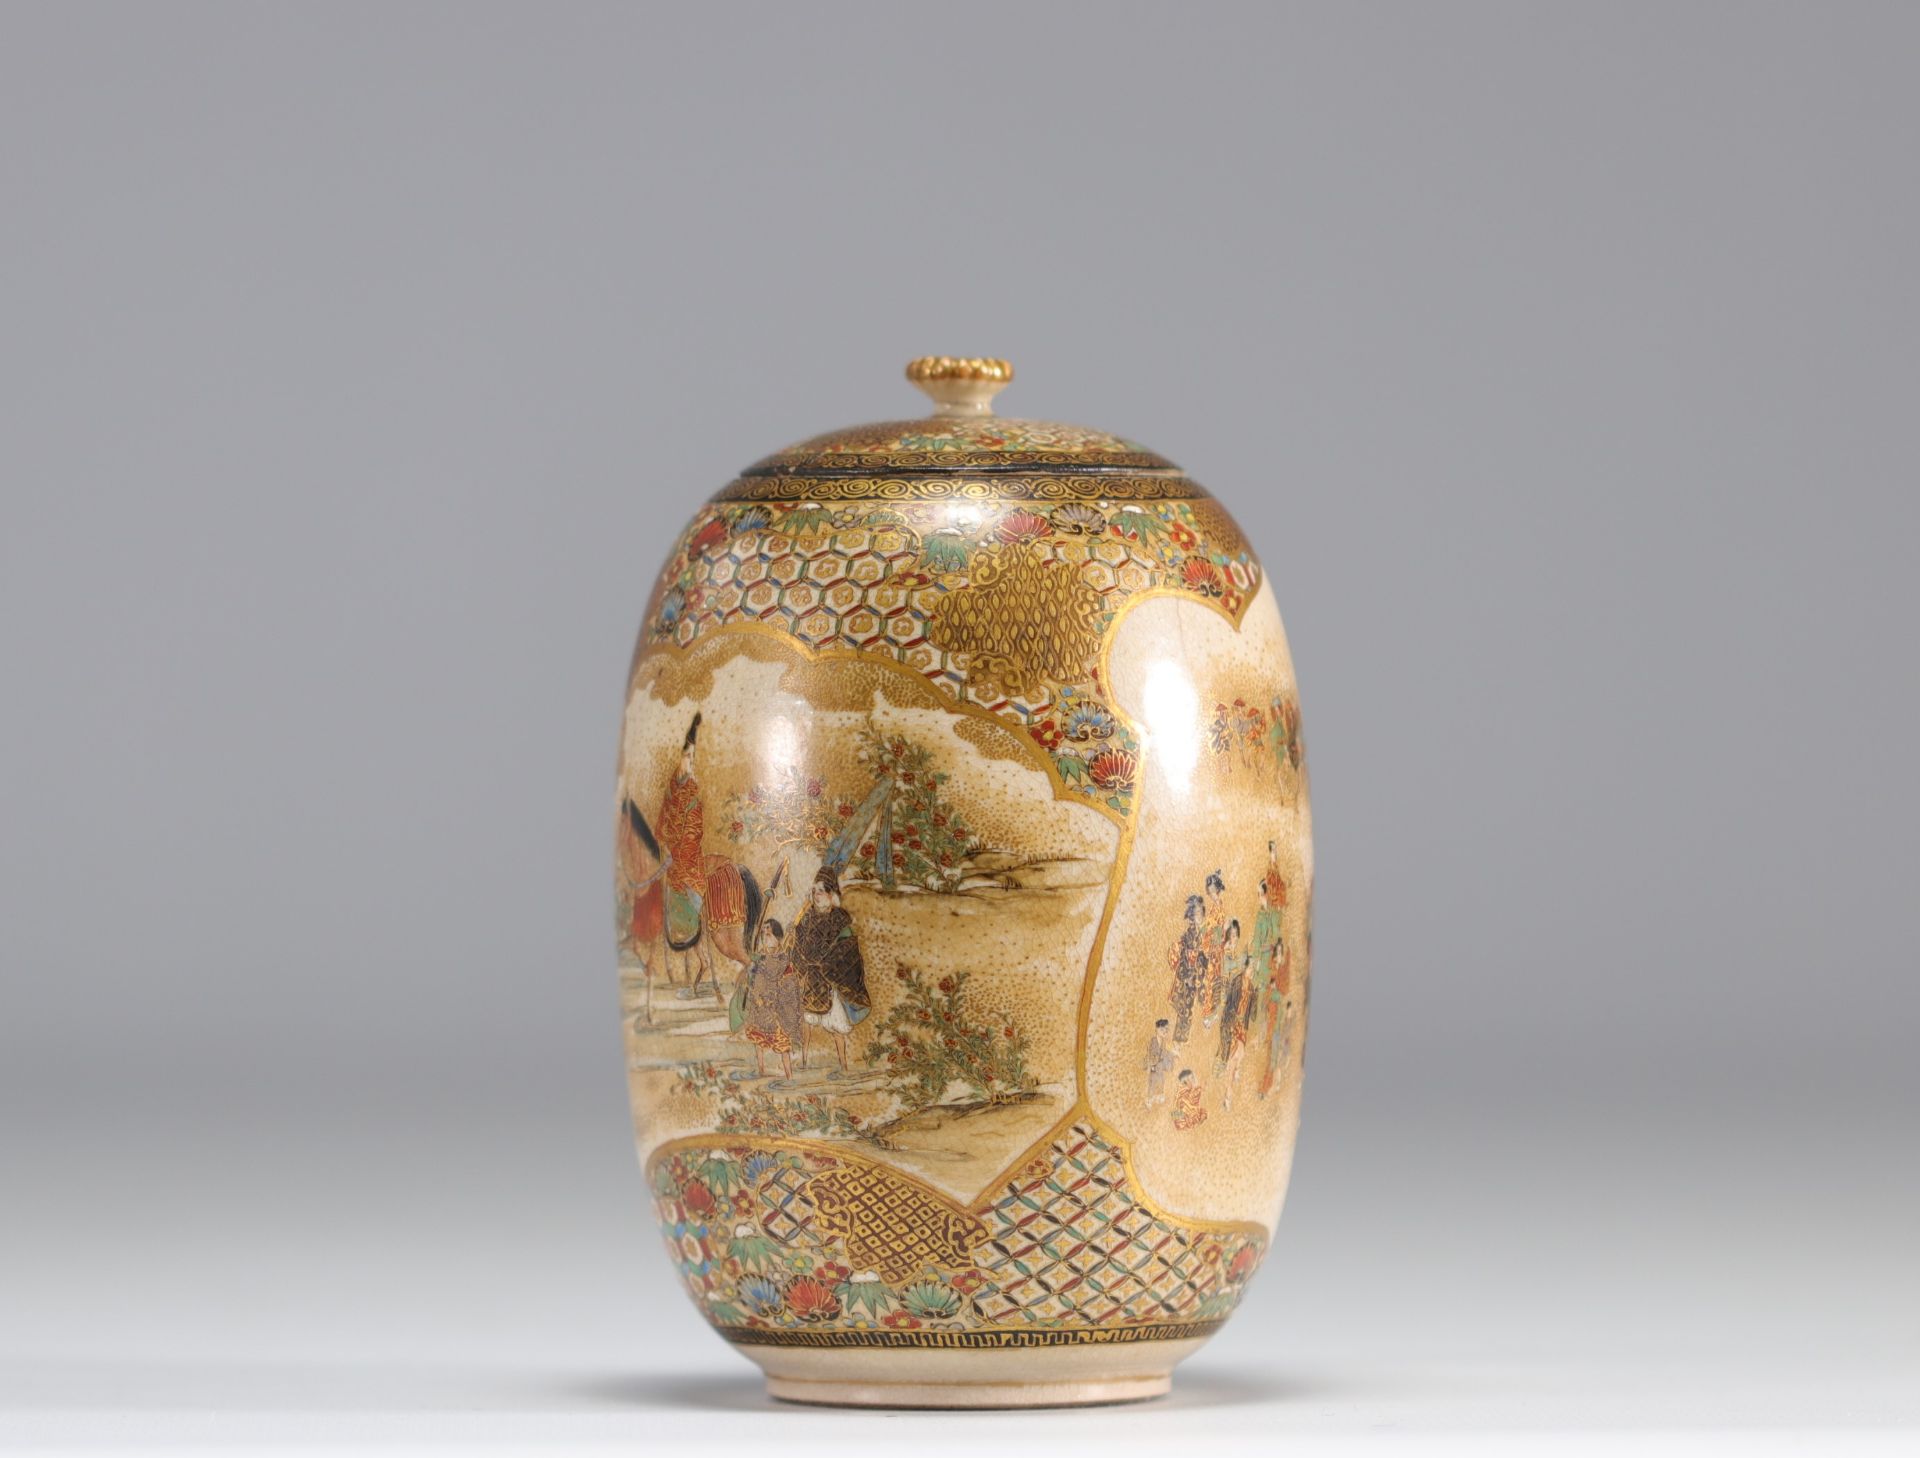 A beautiful enamel-decorated Satsuma covered vase with figures and flowers, circa late 19th century - Image 6 of 6